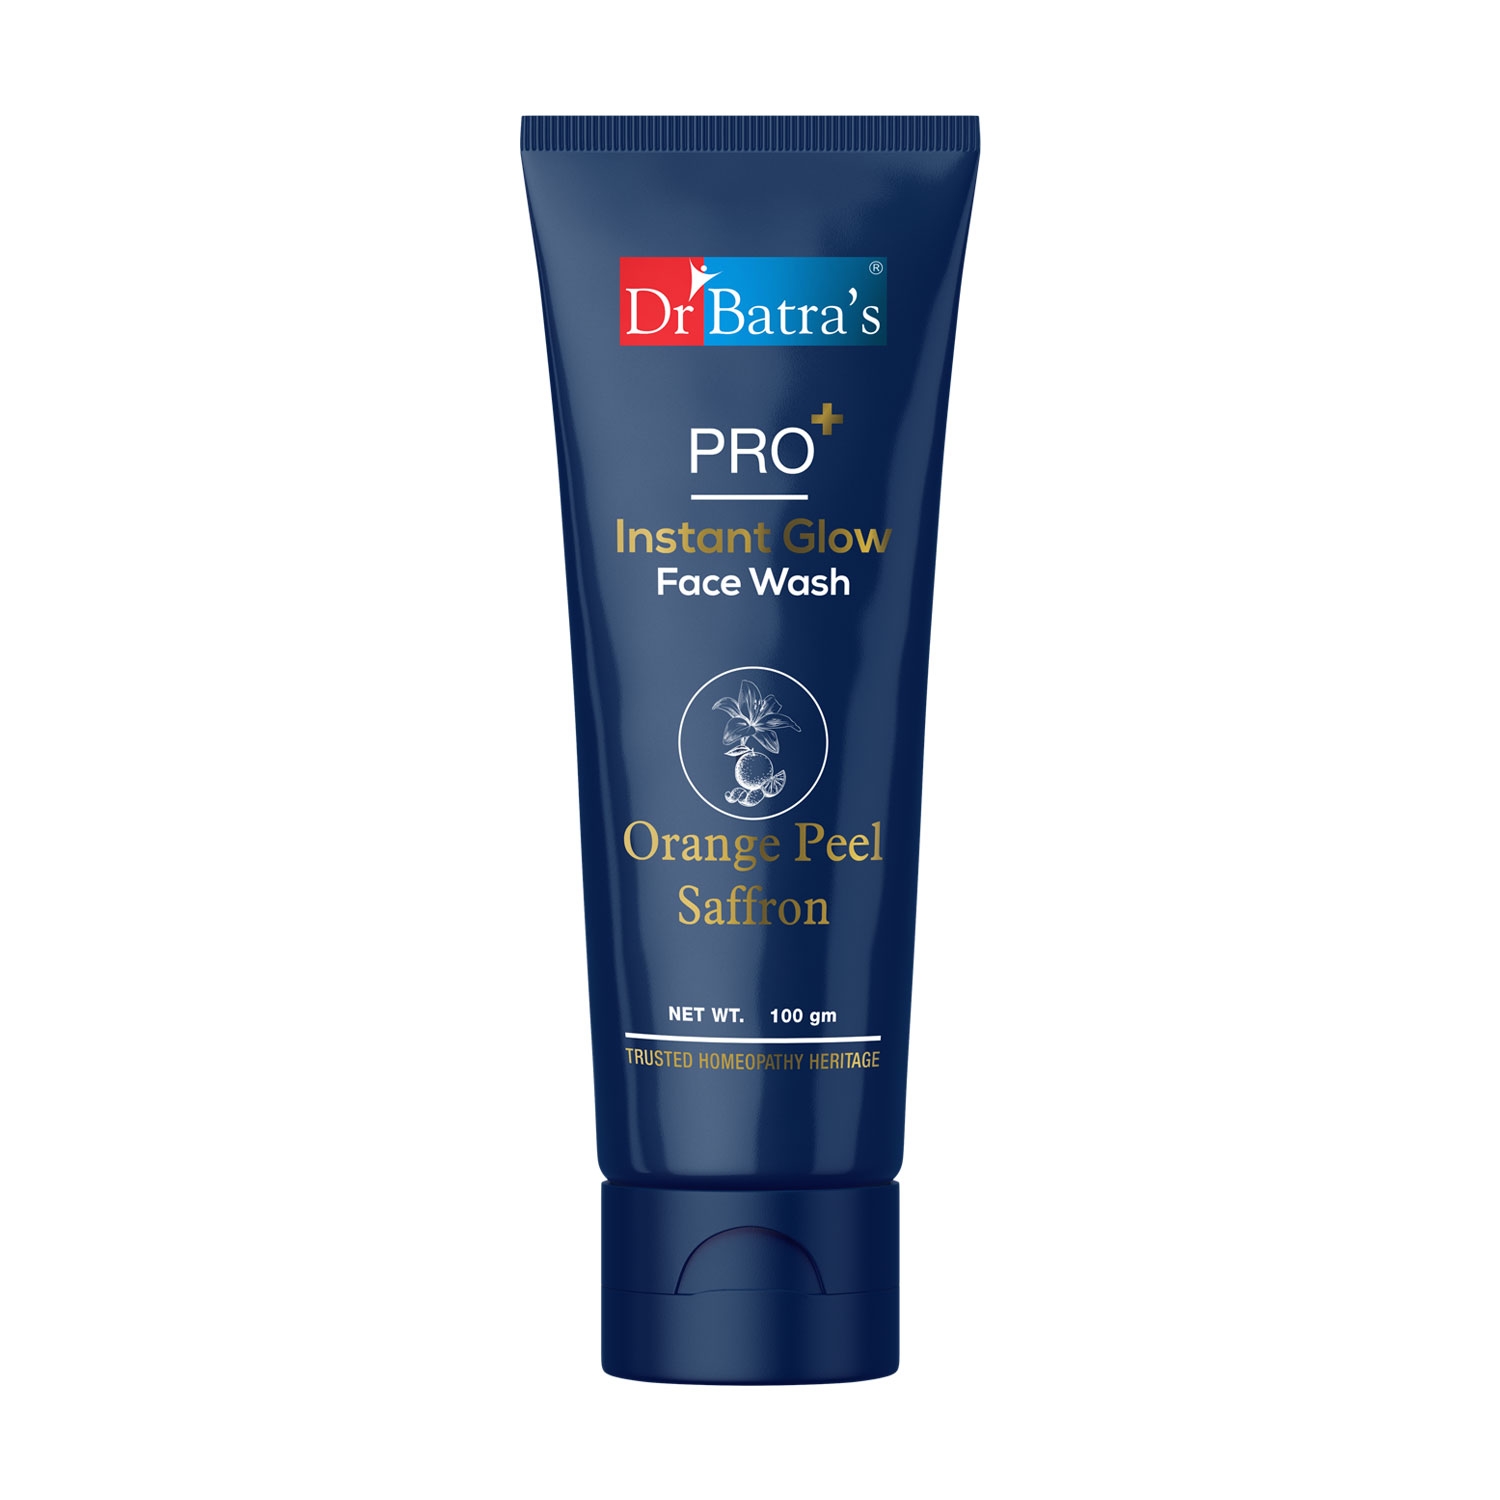 Dr Batra's | Dr Batra's® PRO+ Instant Glow Face Wash. Rejuvenates Skin. ||Protects Against Impurities. Enhances Natural Glow. ||Sulphate-Free, Silicone-Free, Soap-Free. For Men, Women. 100 g.